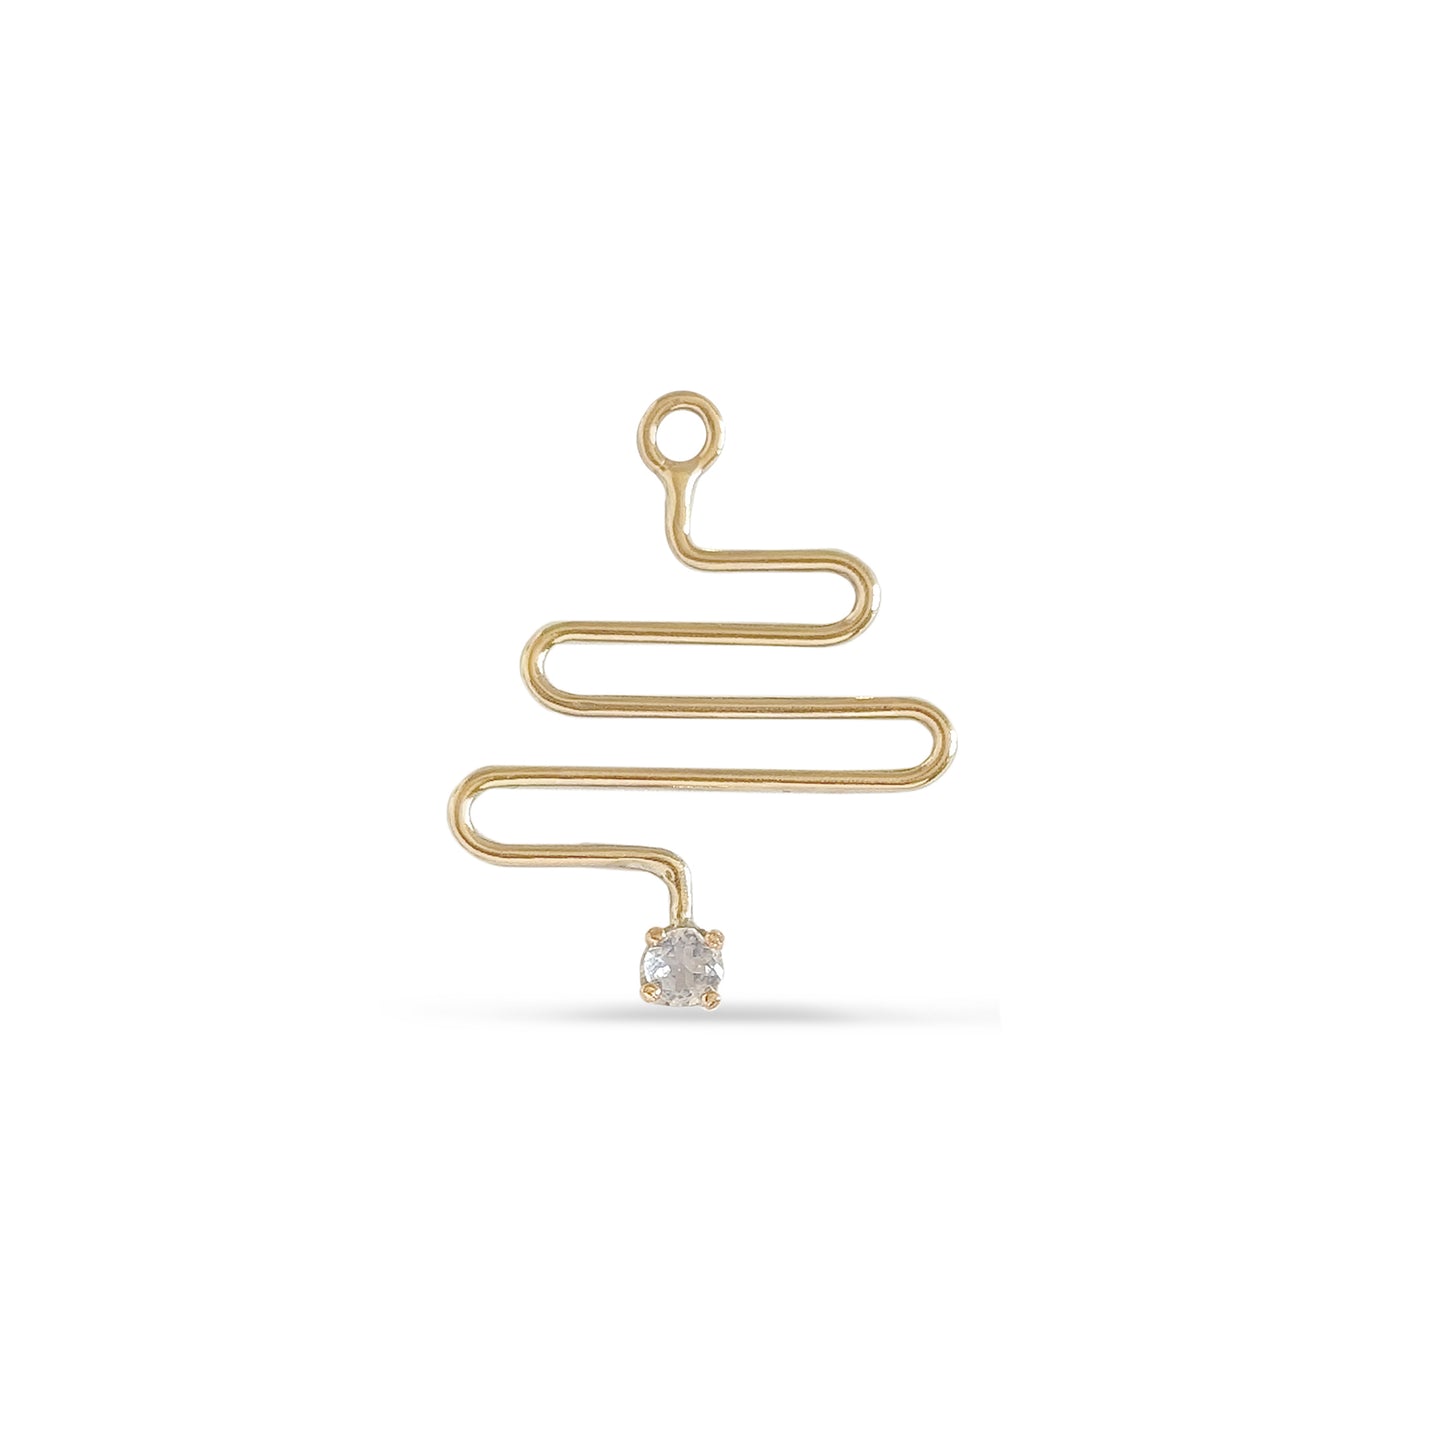 Loop step charm in 14K gold with faceted moonstone